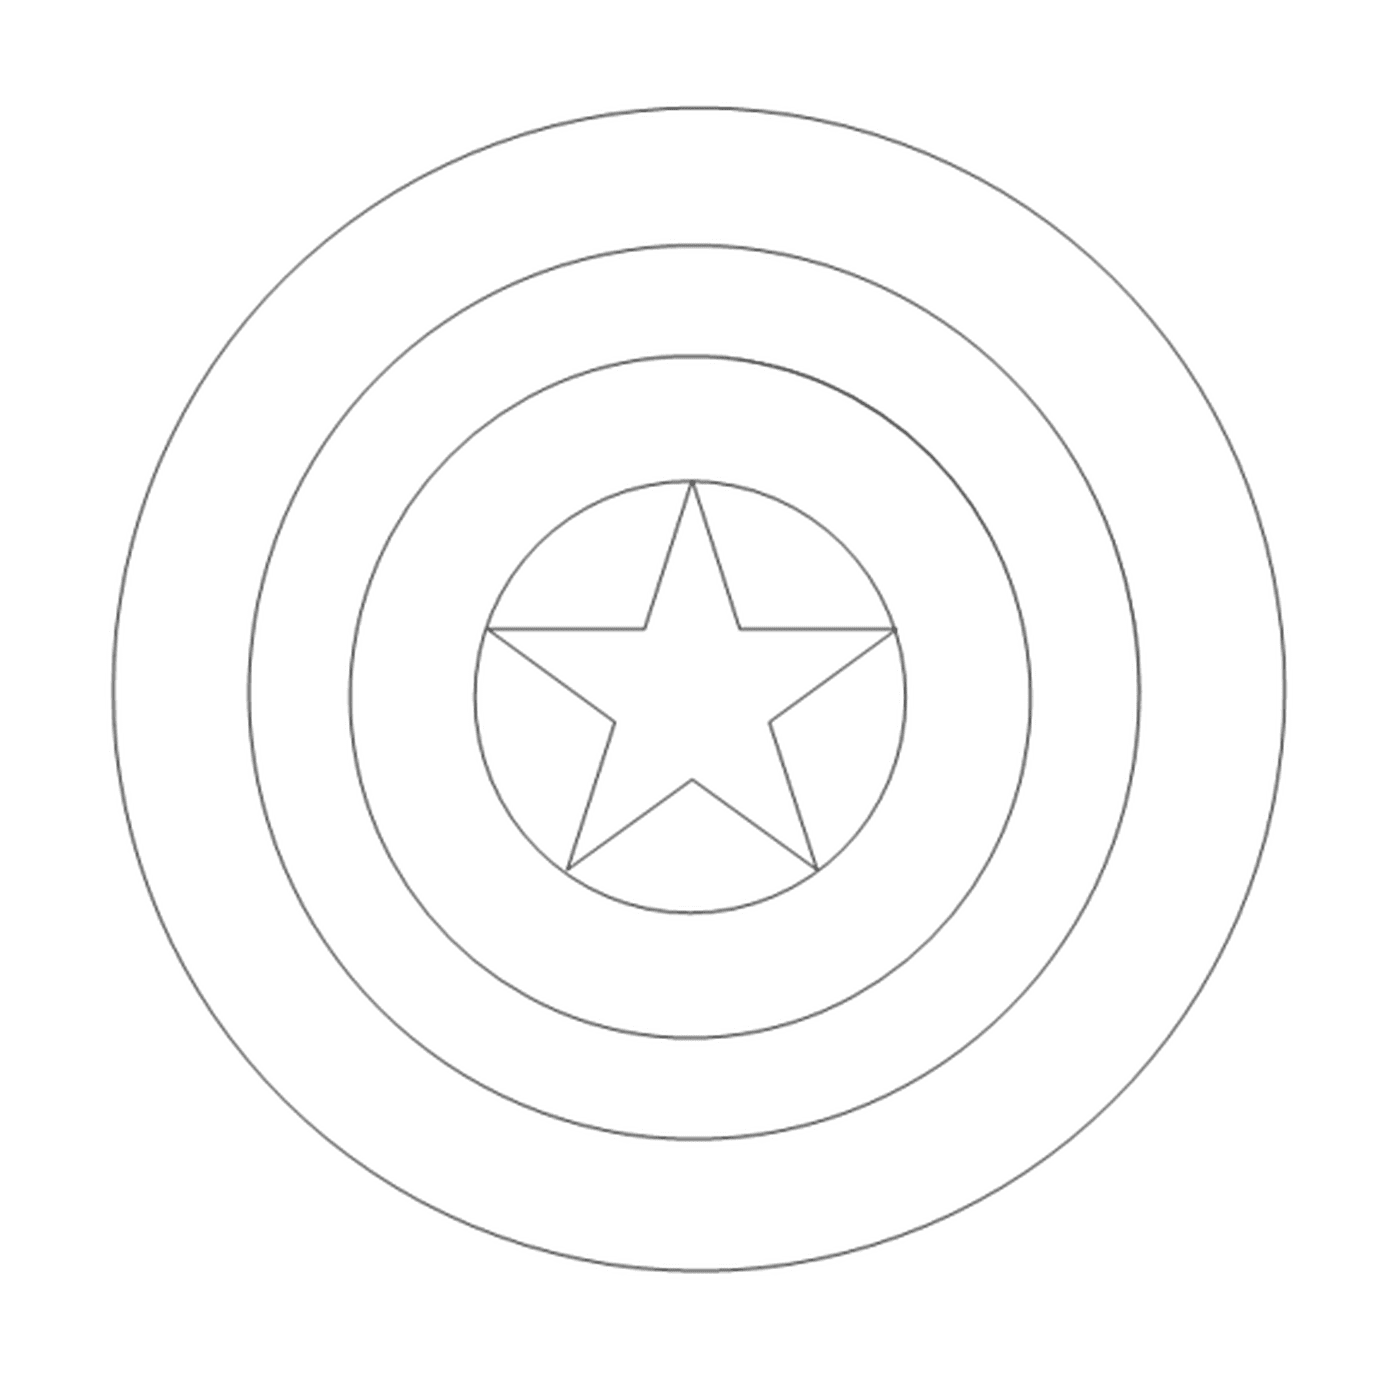  A star in the center of a circle 